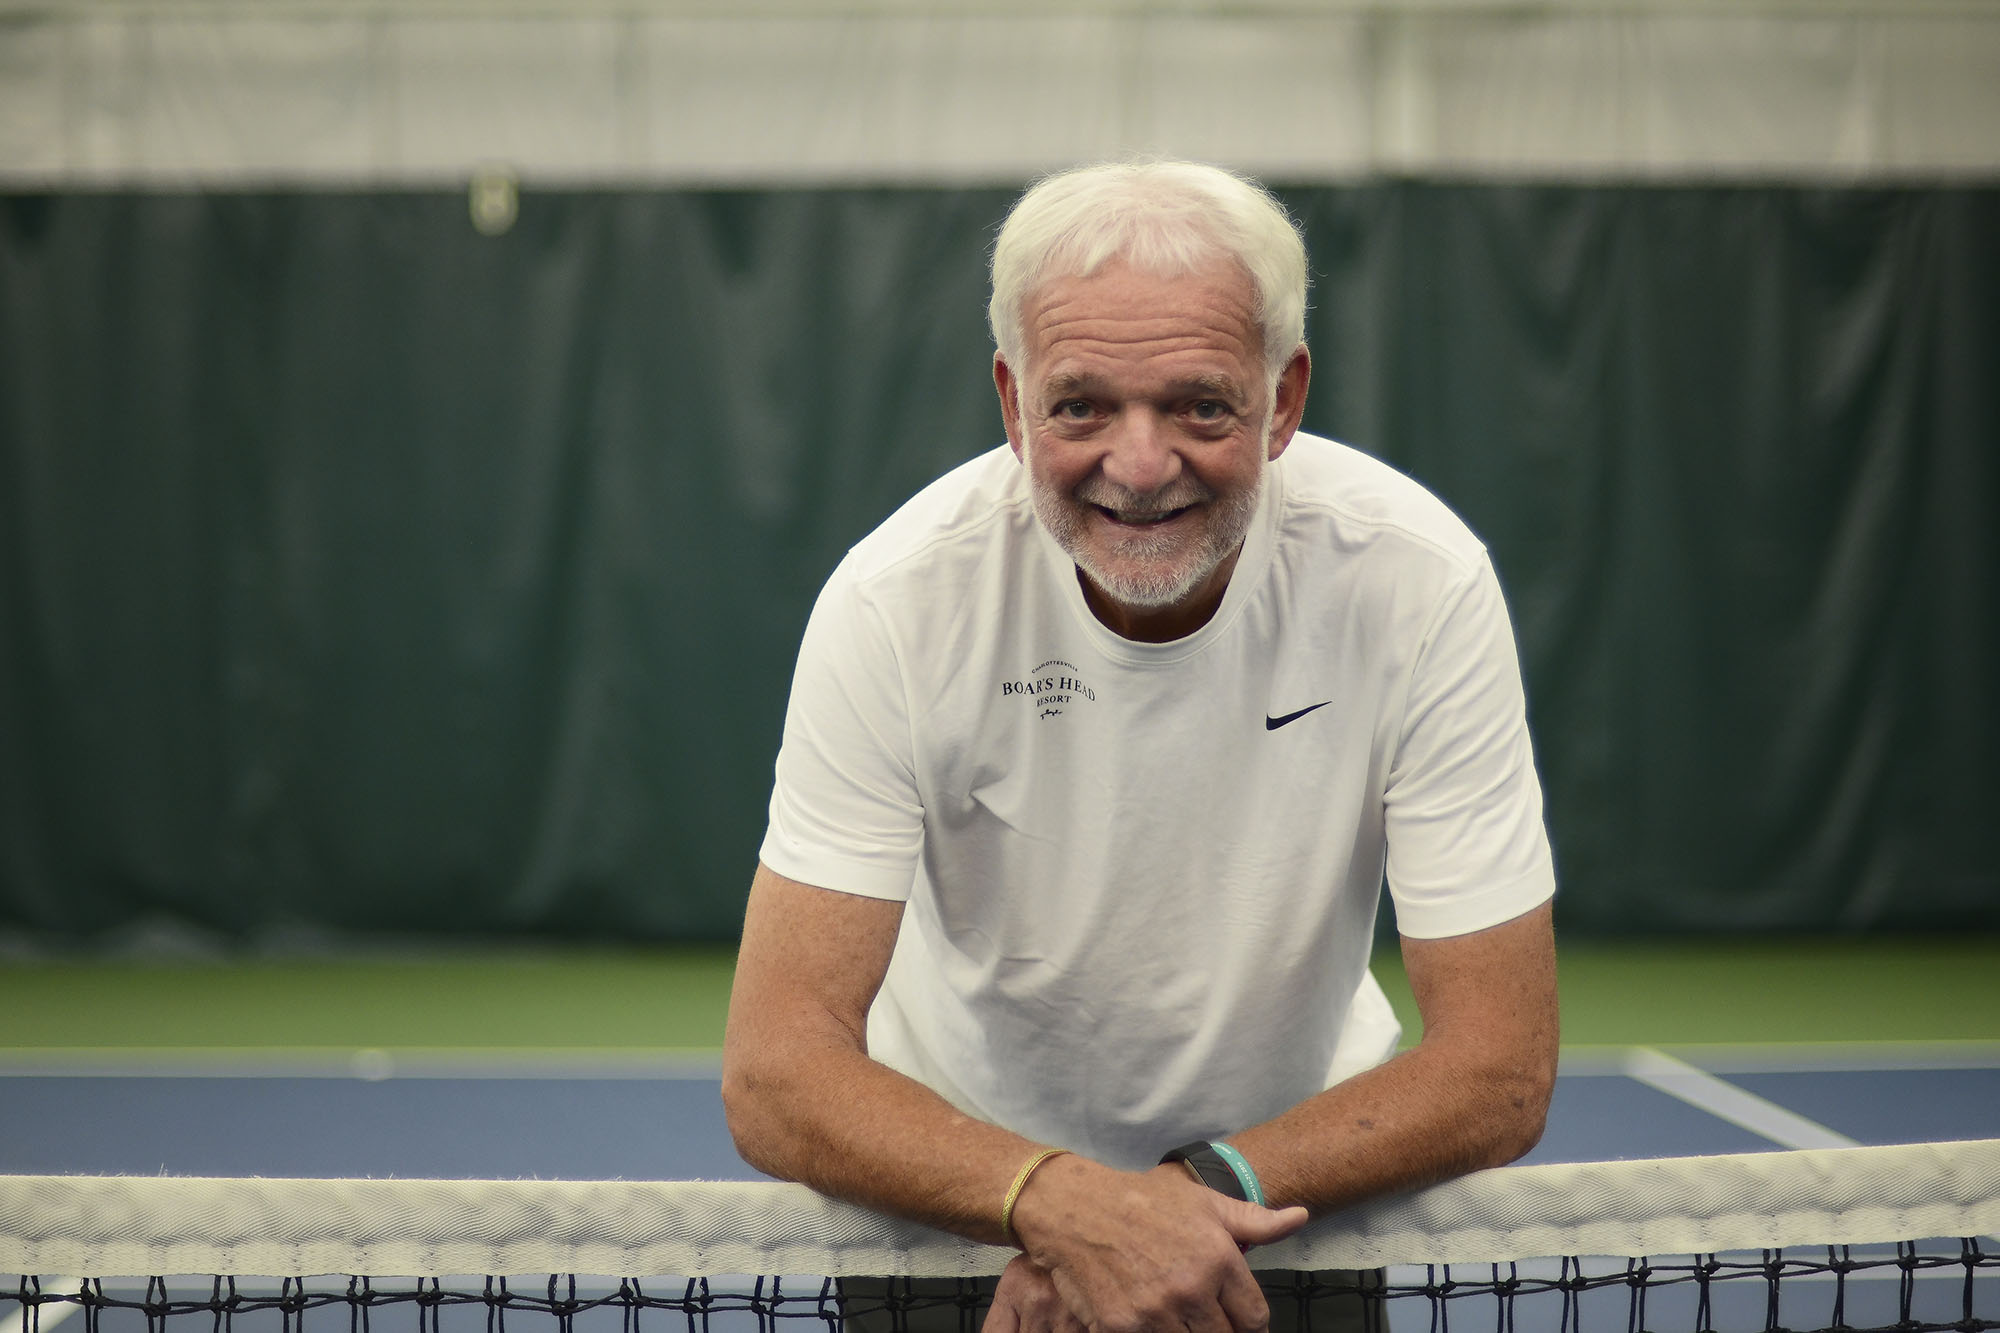 Ron Manilla’s headshot of him leaning on a tennis net